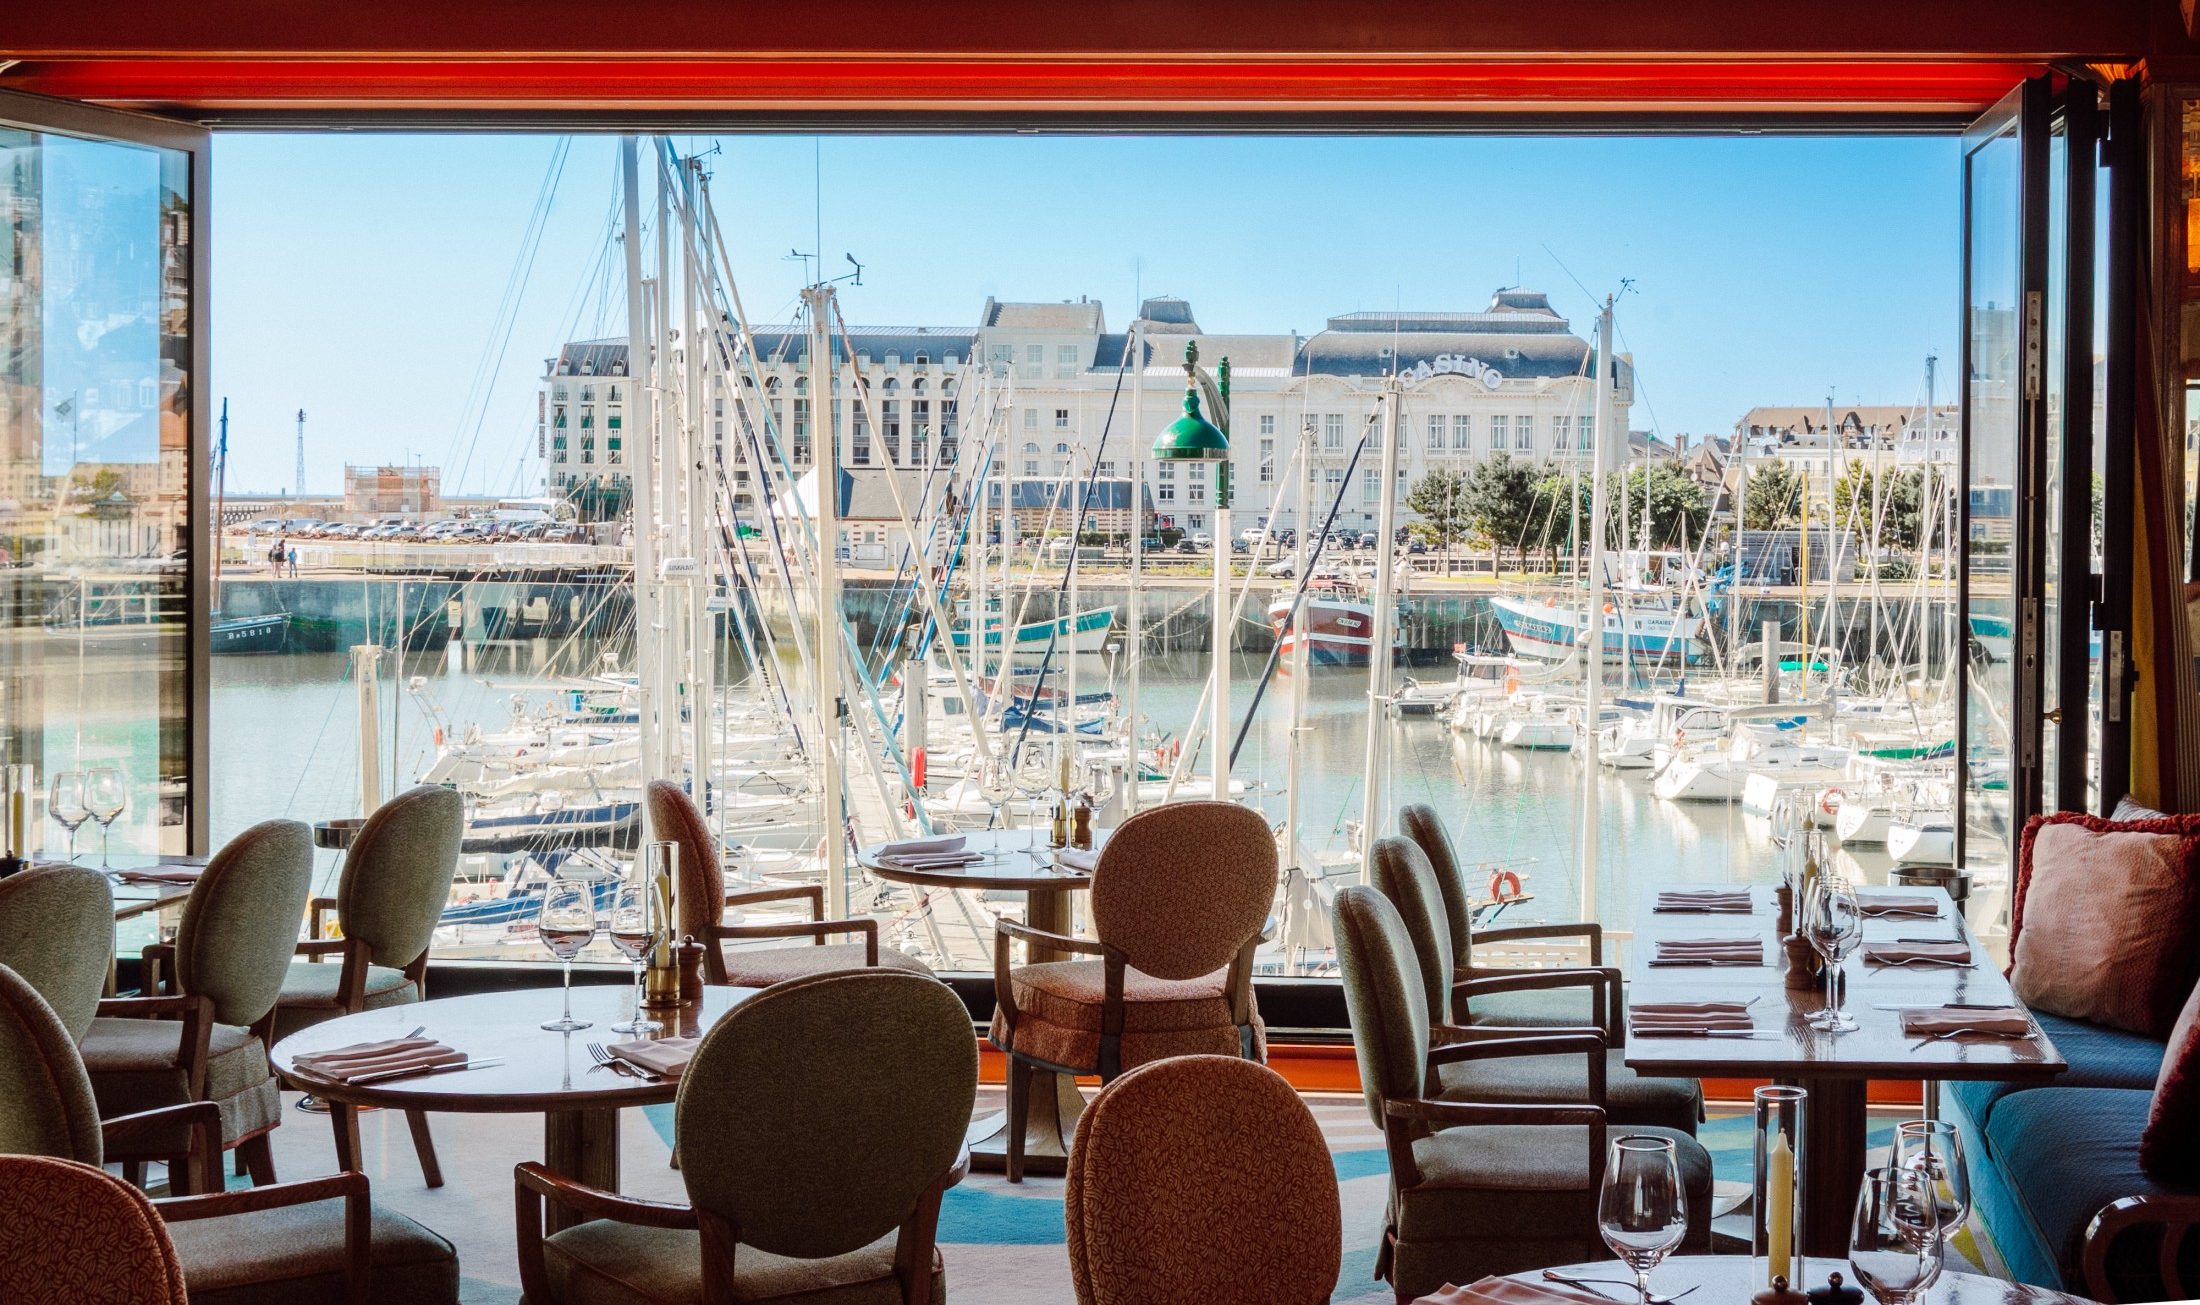 Le Deauville restaurant and its 50s-inspired decor, designed by Martin Brudniski. Our restaurant in deauville offers a sea view over the port of Deauville.